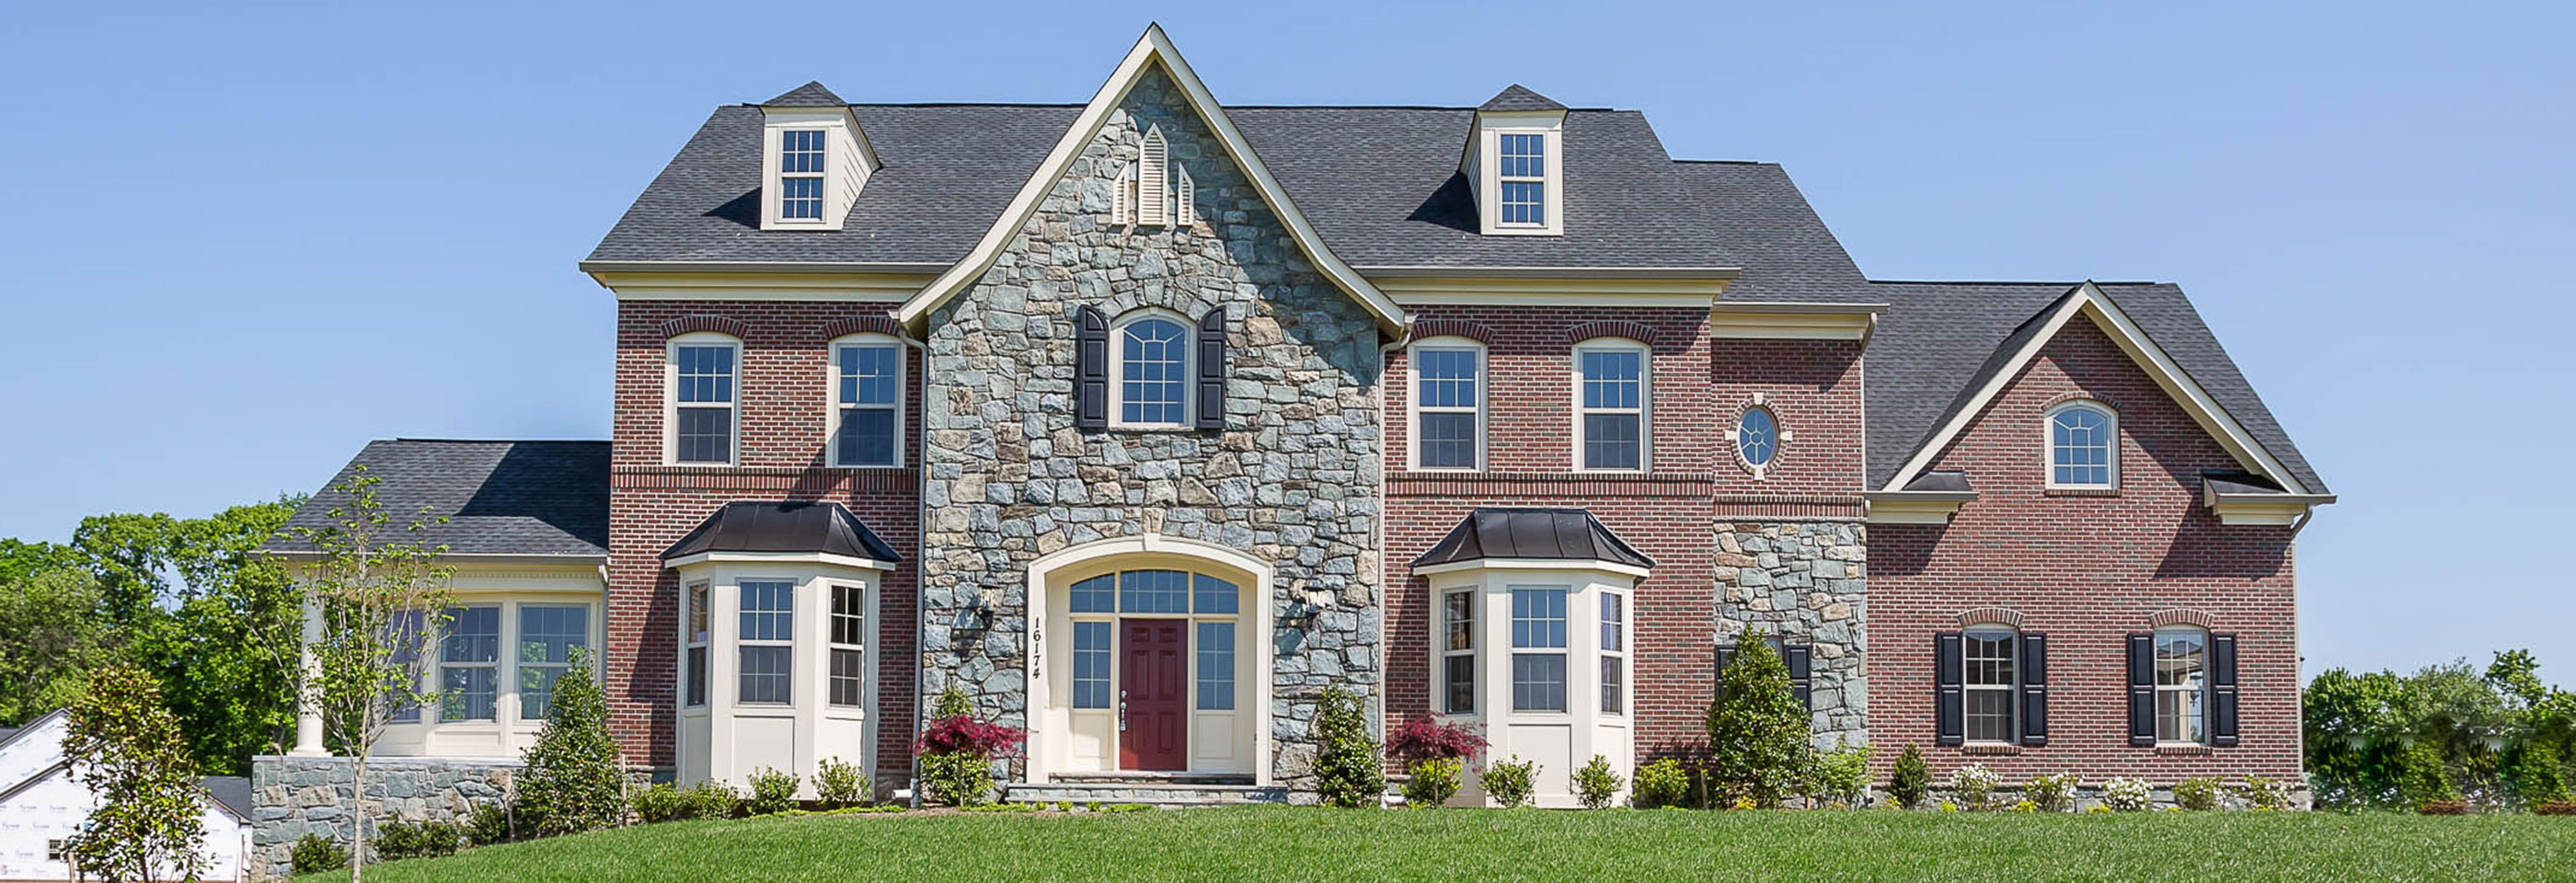 Exteriors, Custom Single Family Homes in Montgomery County MD